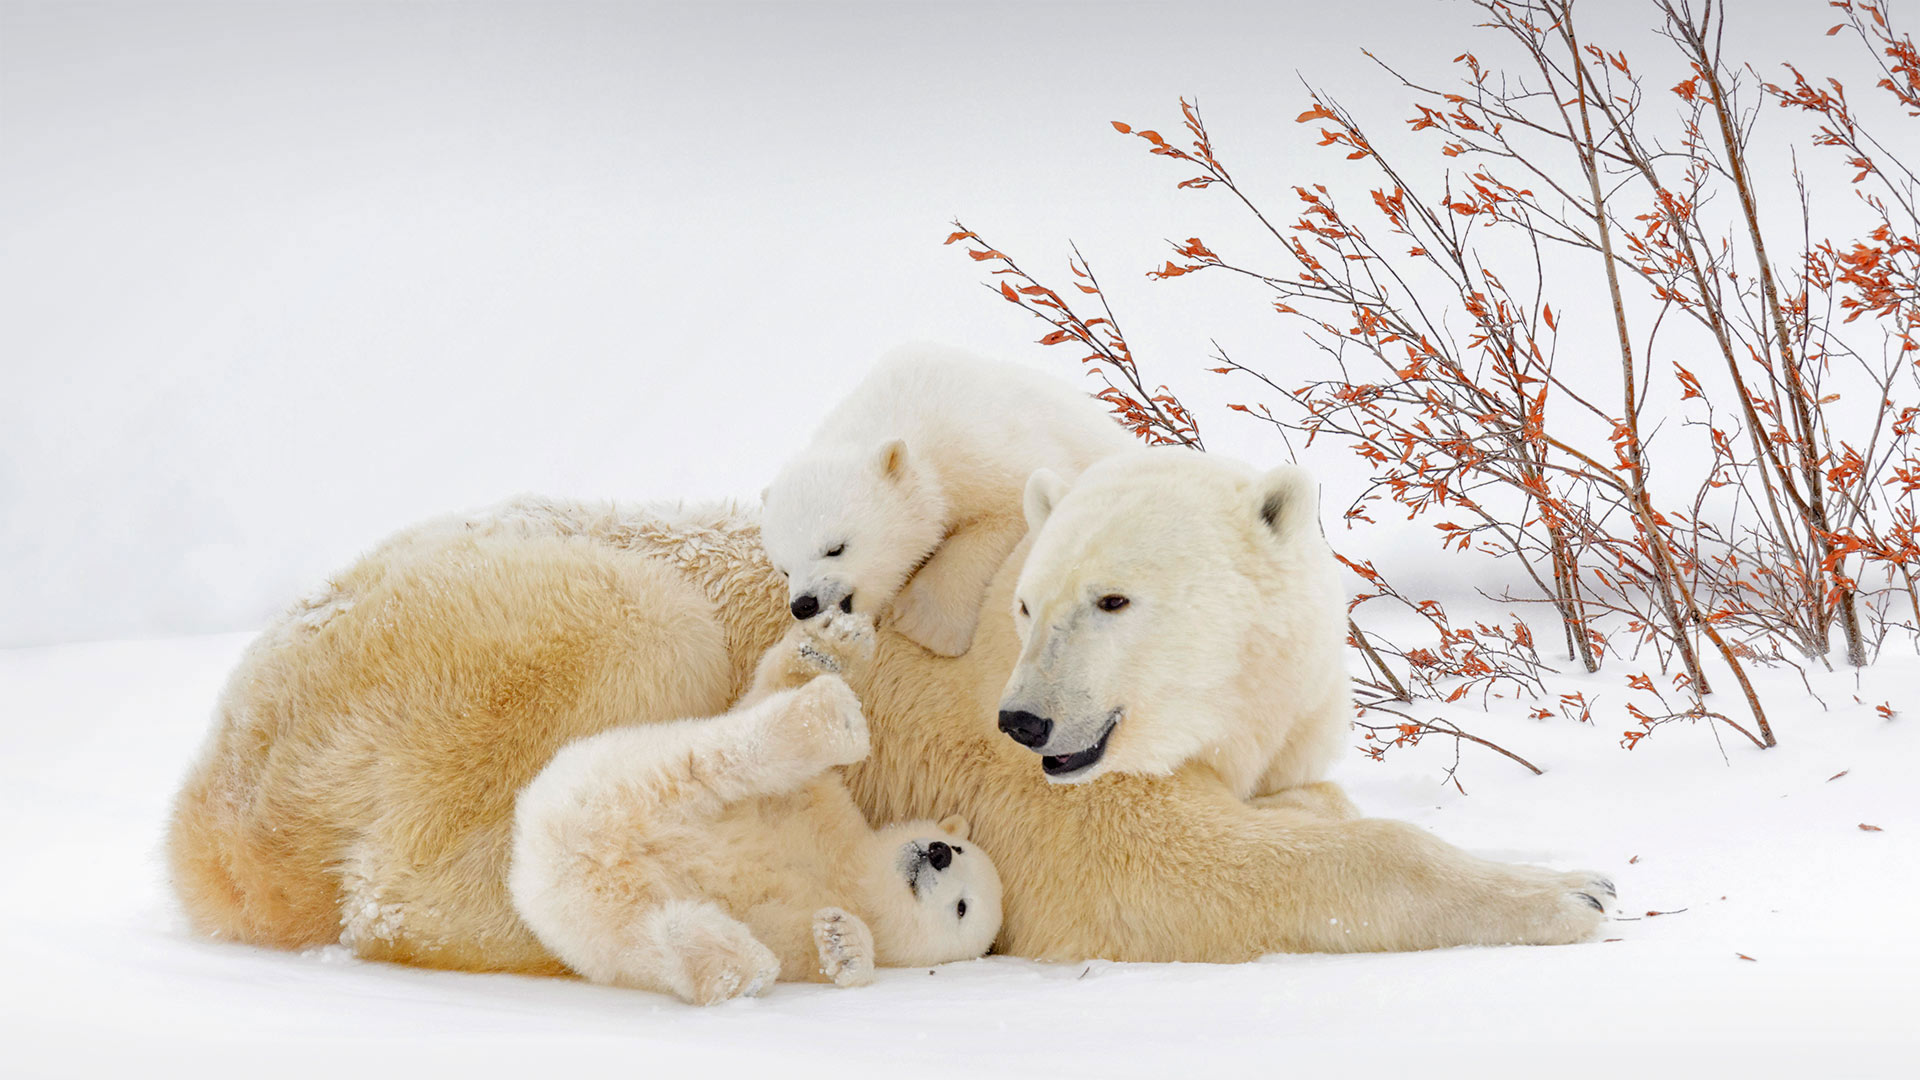 Polar bear mother with cubs in Wapusk National Park, Manitoba, Canada - Andre Gilden